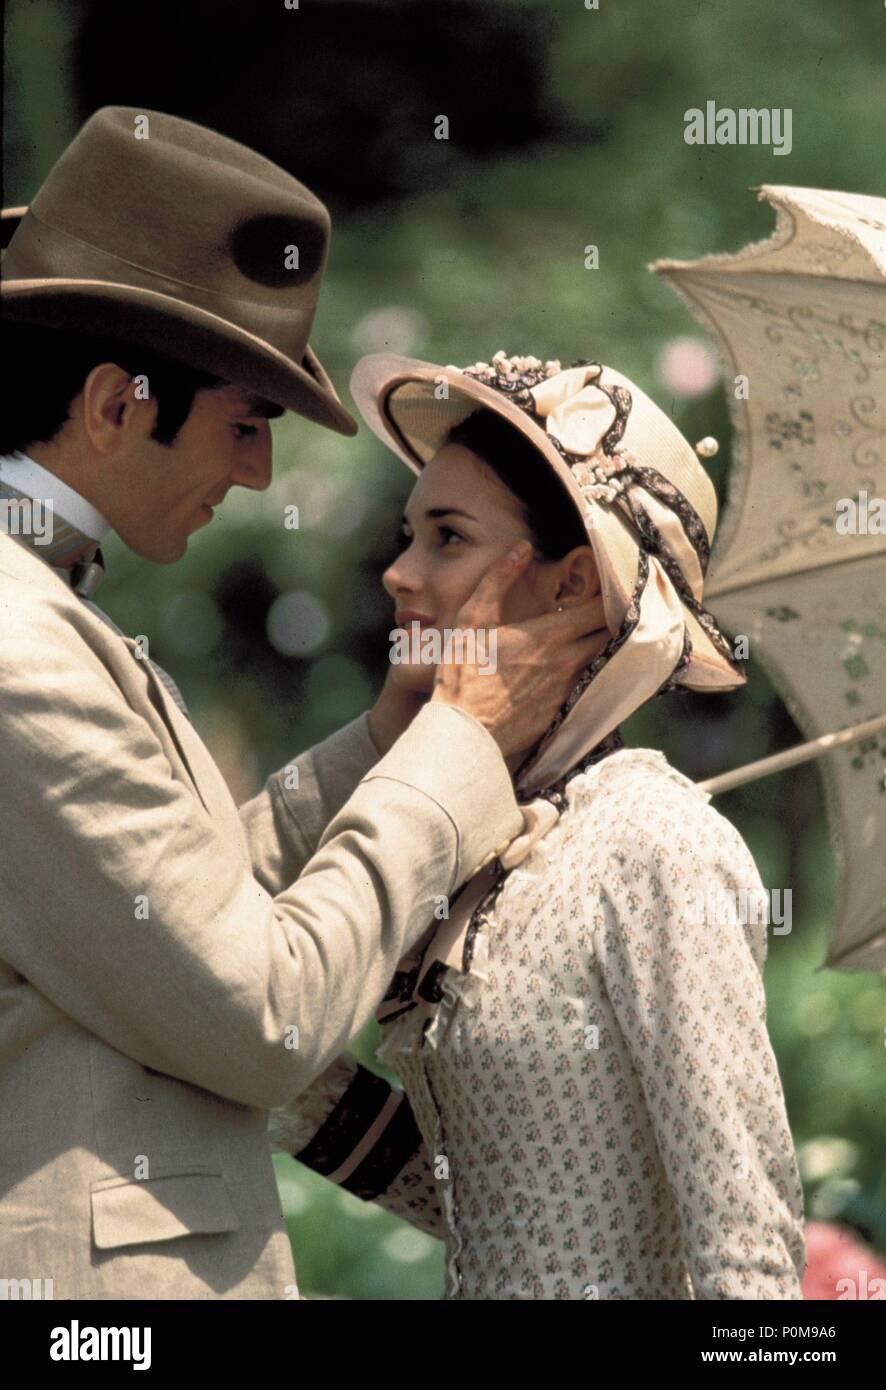 Original Film Title: THE AGE OF INNOCENCE.  English Title: THE AGE OF INNOCENCE.  Film Director: MARTIN SCORSESE.  Year: 1993.  Stars: DANIEL DAY-LEWIS; WINONA RYDER. Credit: COLUMBIA PICTURES / CARUSO, PHILLIP / Album Stock Photo